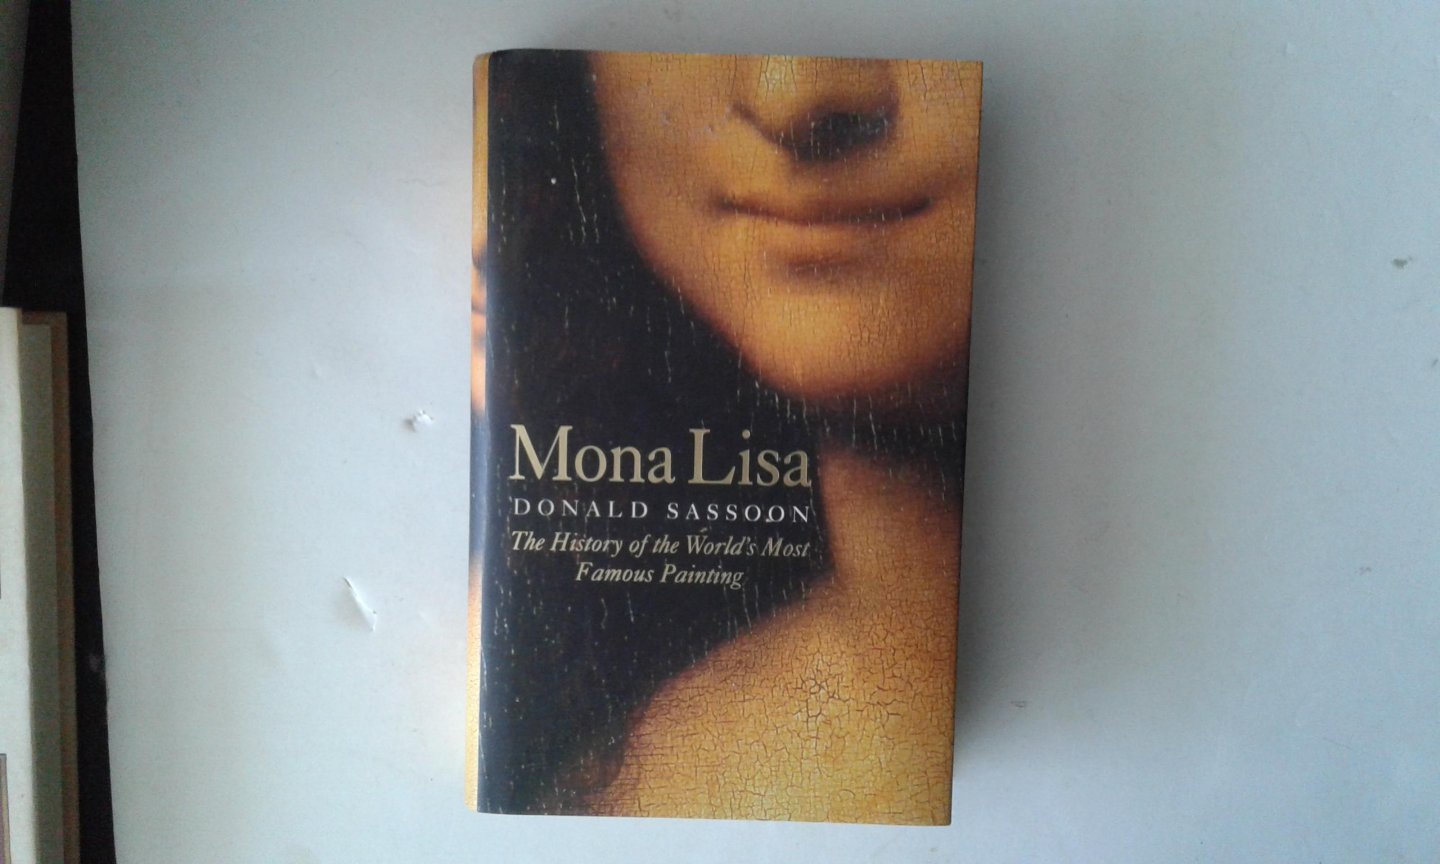 Sassoon, Donald - Mona Lisa ; The History of the World's Most Famous Painting